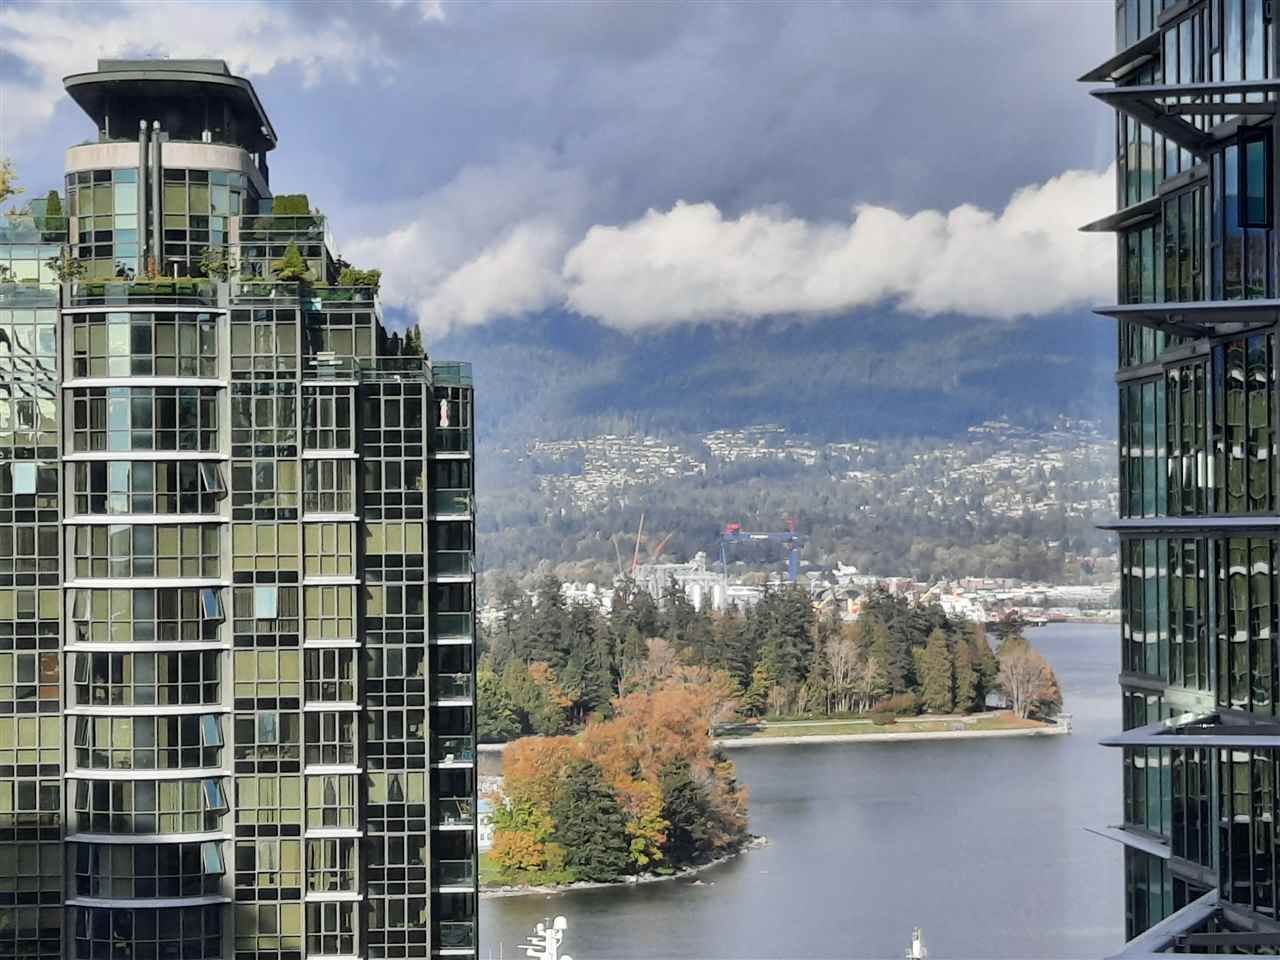 Main Photo: 1803 1331 ALBERNI STREET in Vancouver: West End VW Condo for sale (Vancouver West)  : MLS®# R2508802